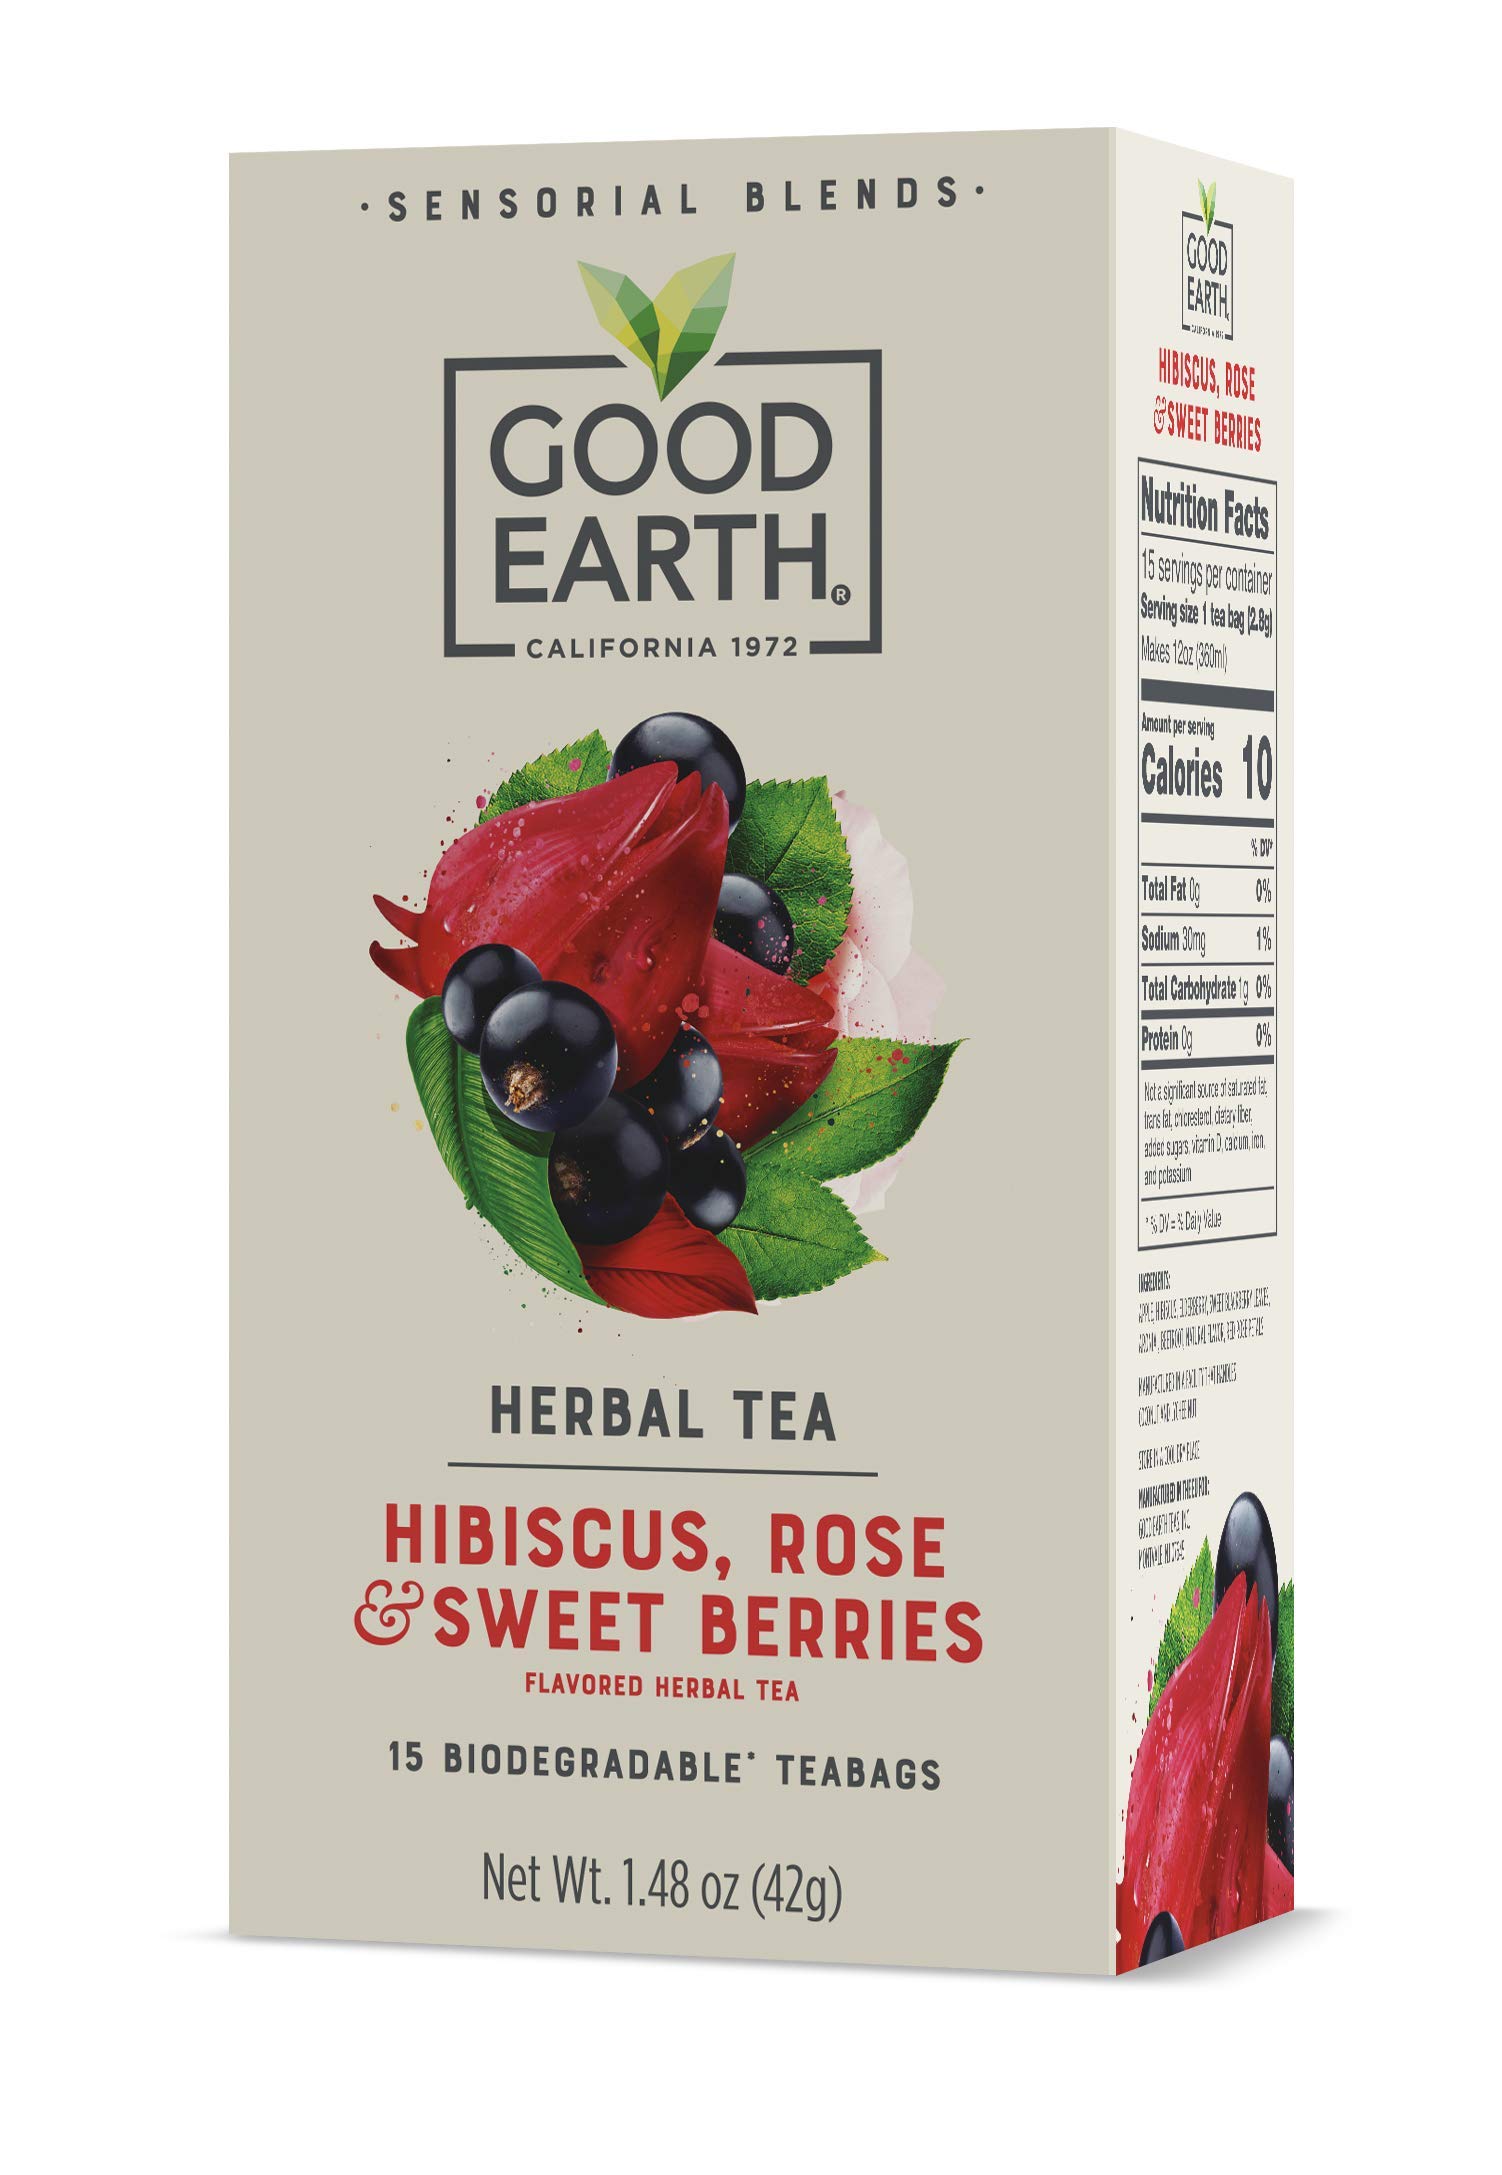 Good Earth Sensorial Blend All Natural Hibiscus, Rose and Sweet Berries Herbal Tea, 15 Count Tea Bags (Pack of 5) - $3.75 AC shipped w/ Amazon Prime